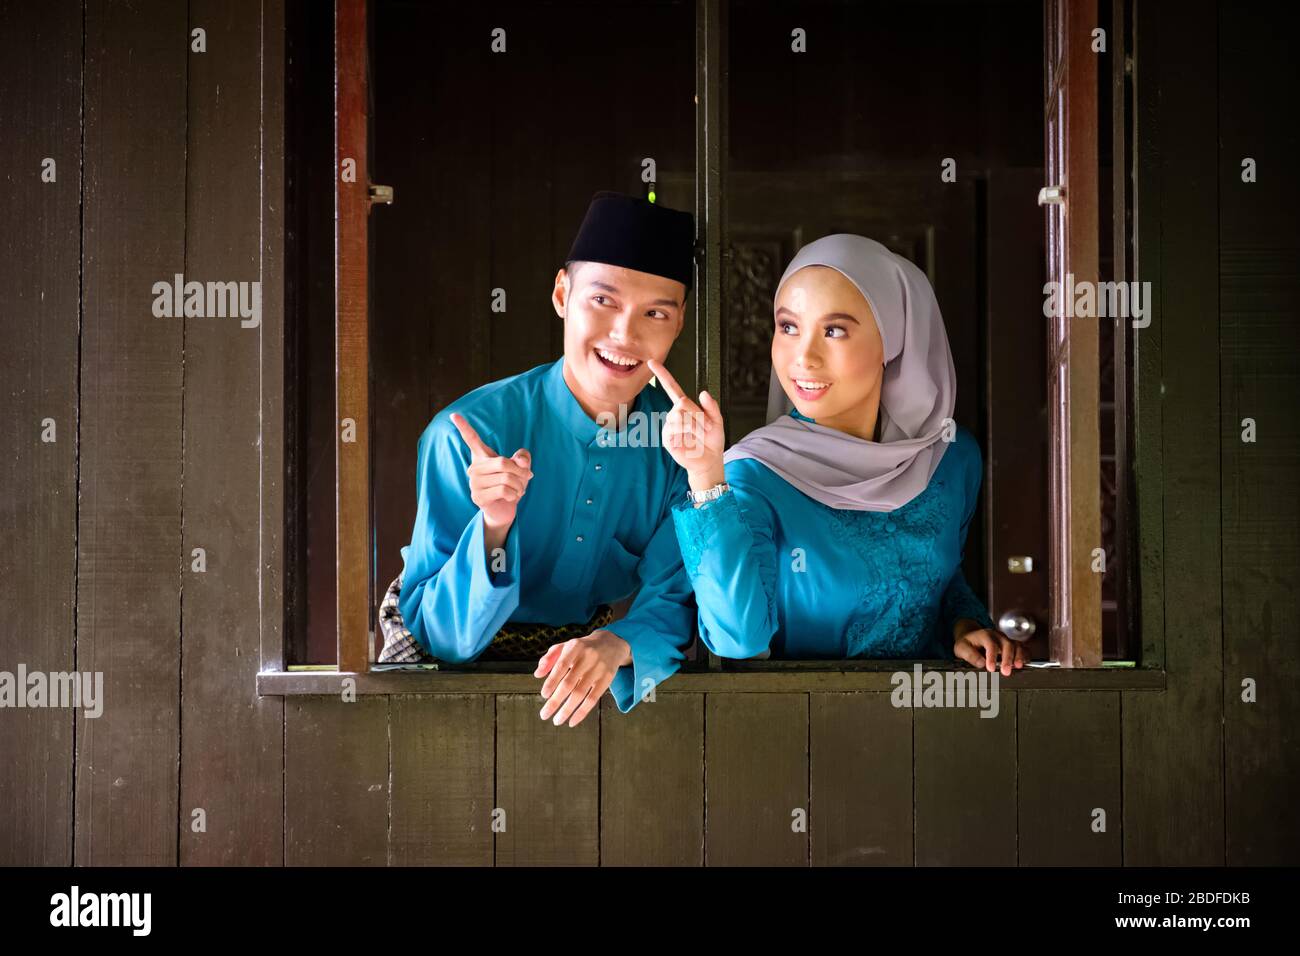 A portrait of young couple of malay muslim in traditional costume during Aidilfitri celebration at the wooden window of traditional house. Raya and Mu Stock Photo